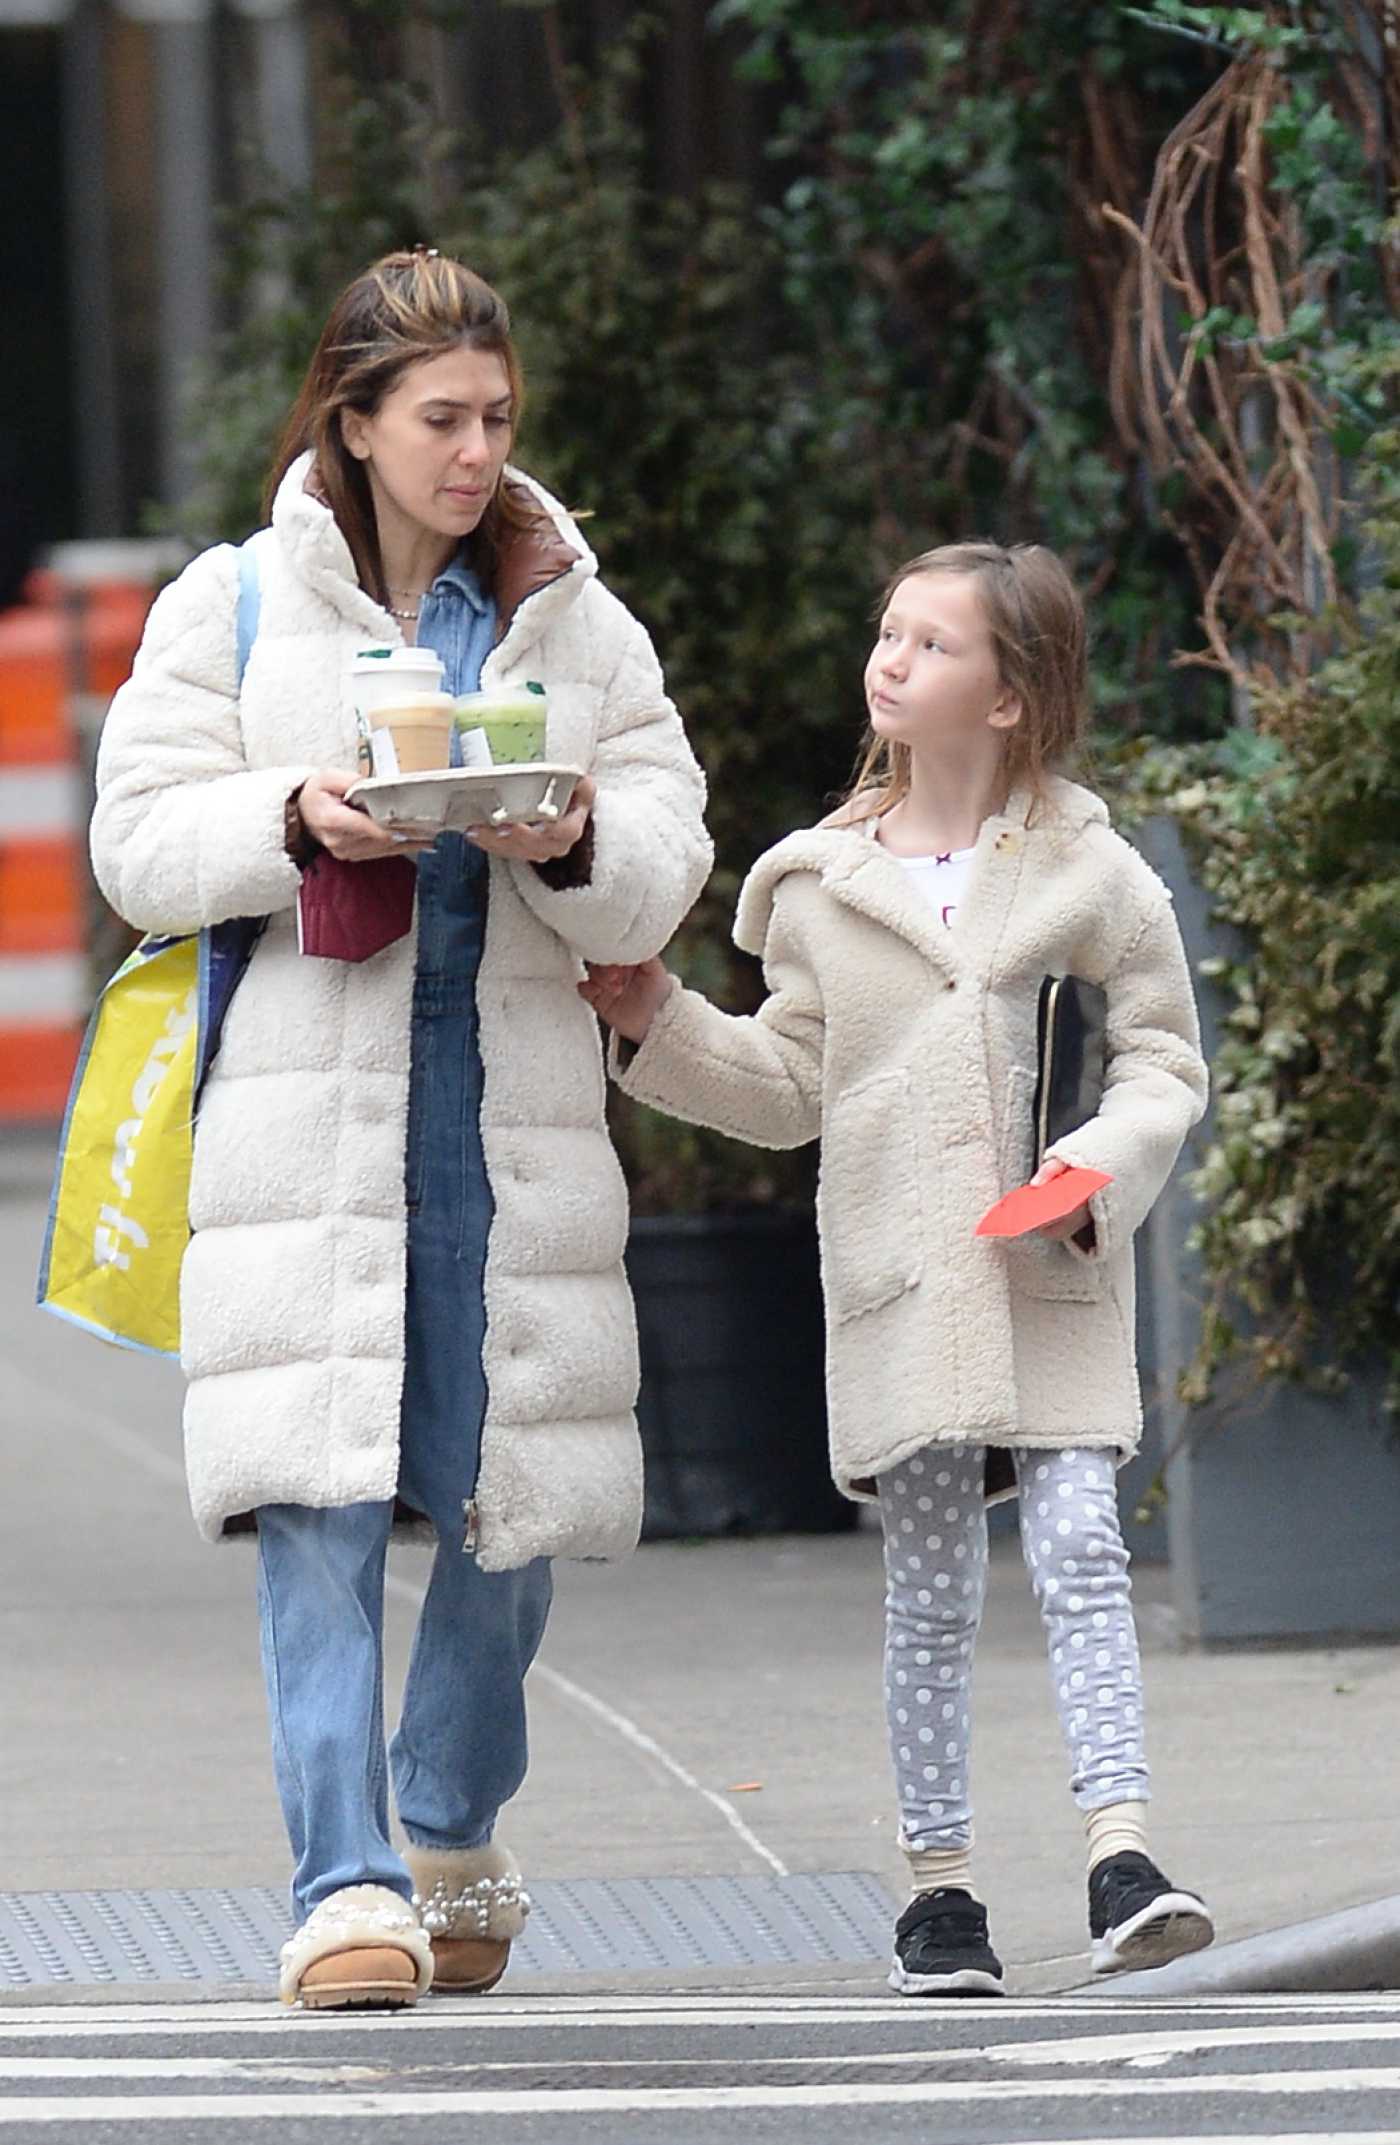 Hilaria Baldwin in a White Coat Was Seen Out with Her Daughter in NYC 03/07/2022